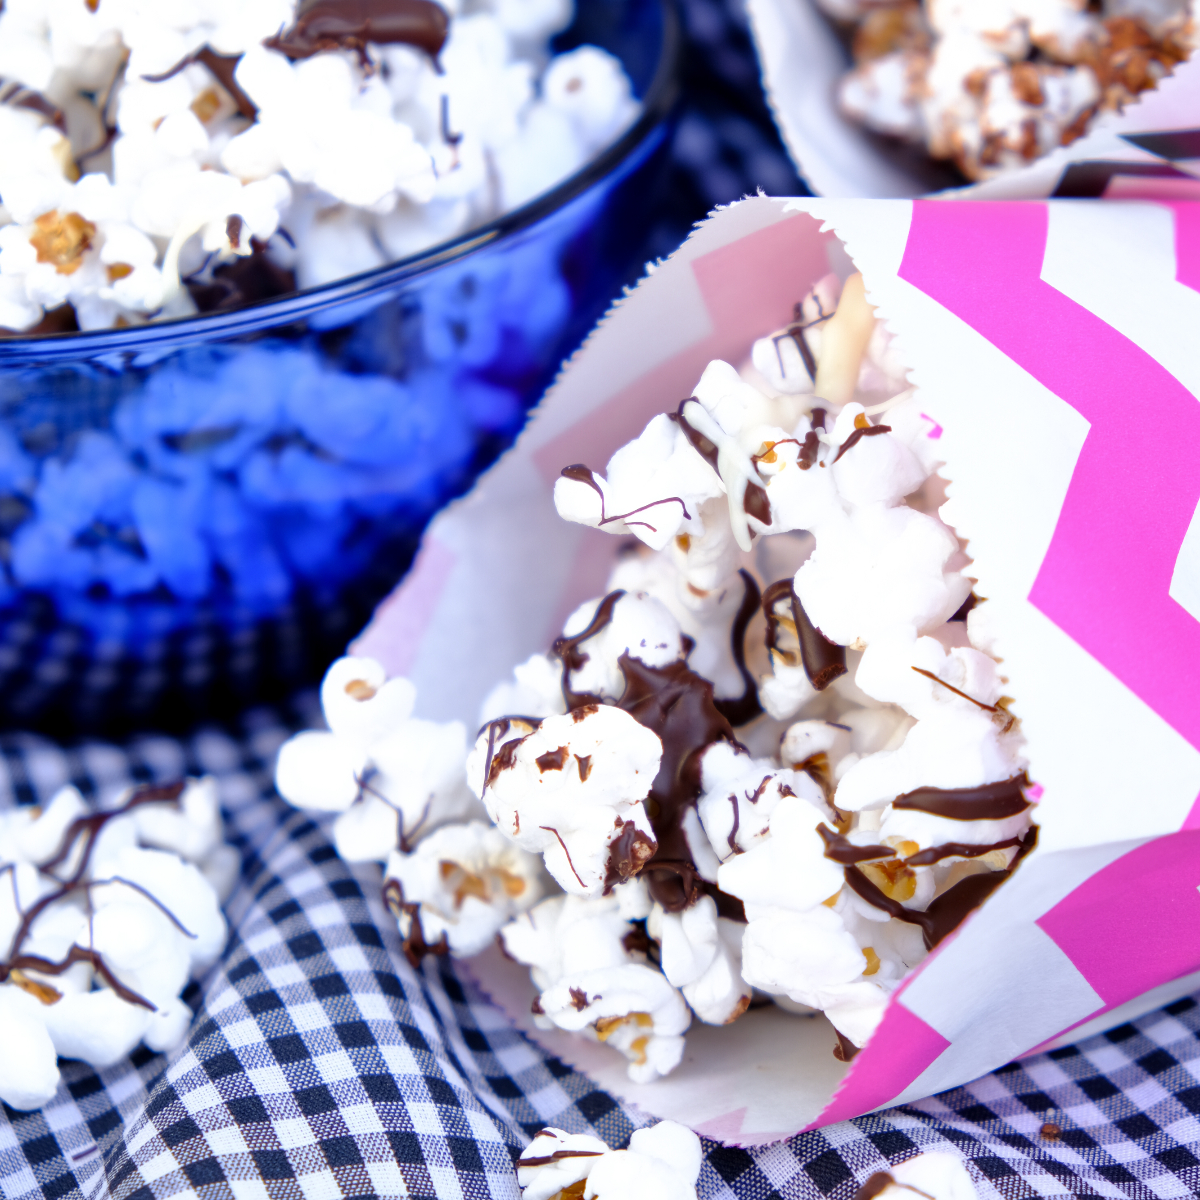 Popcorn drizzled in chocolate in small colorful paper bags ready to eat.